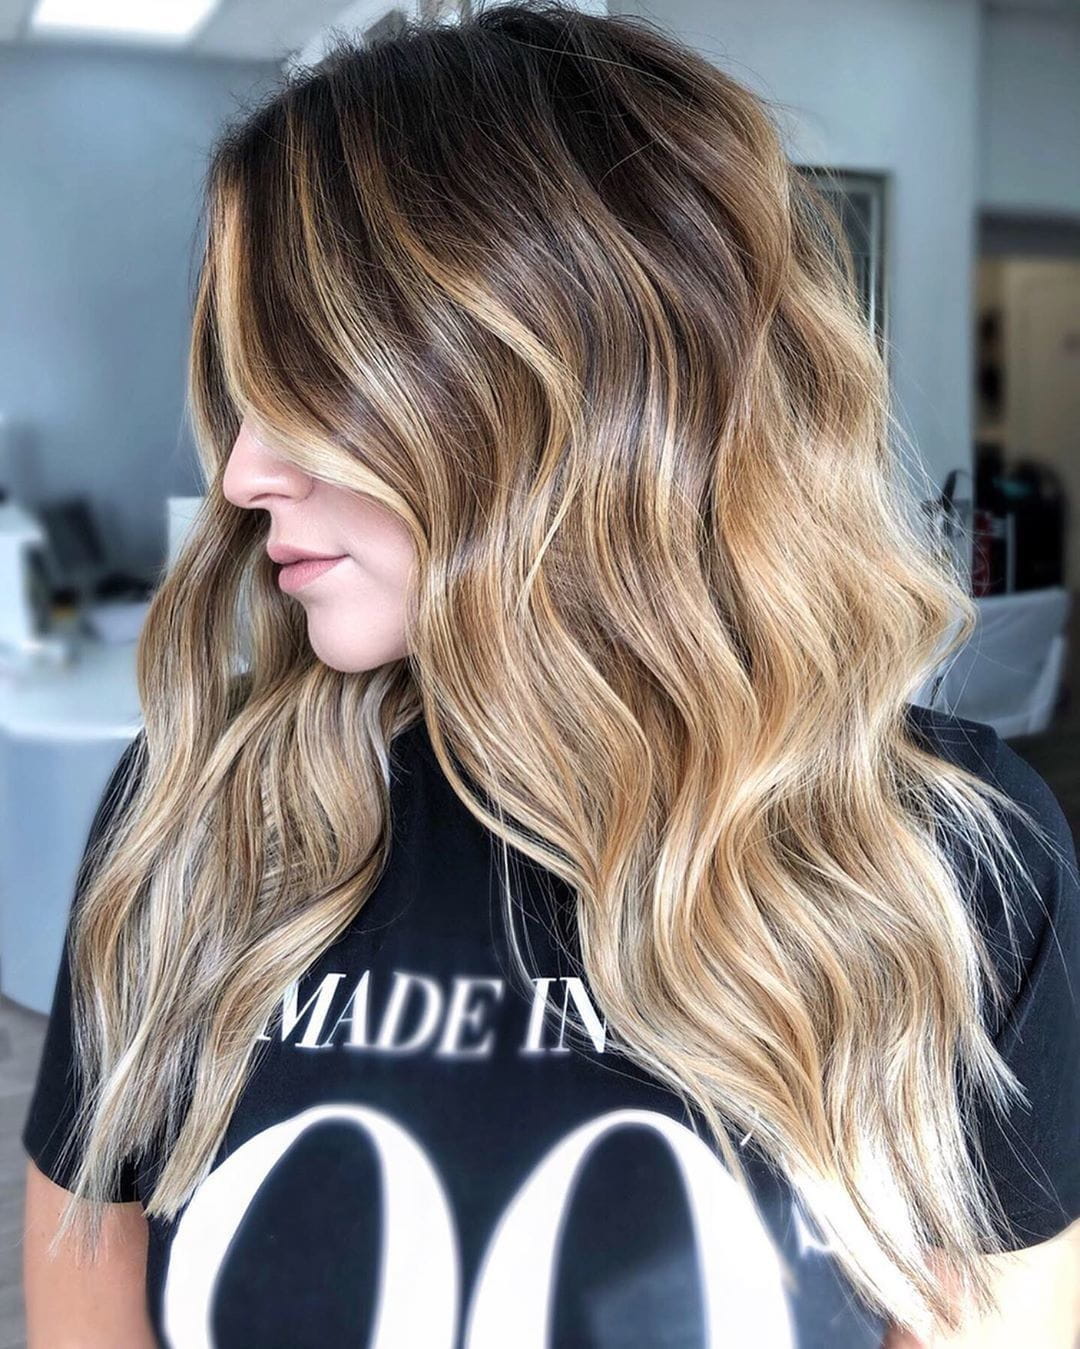 100+ Hairstyle And Hair Colors For Winter That Are Trending images 15